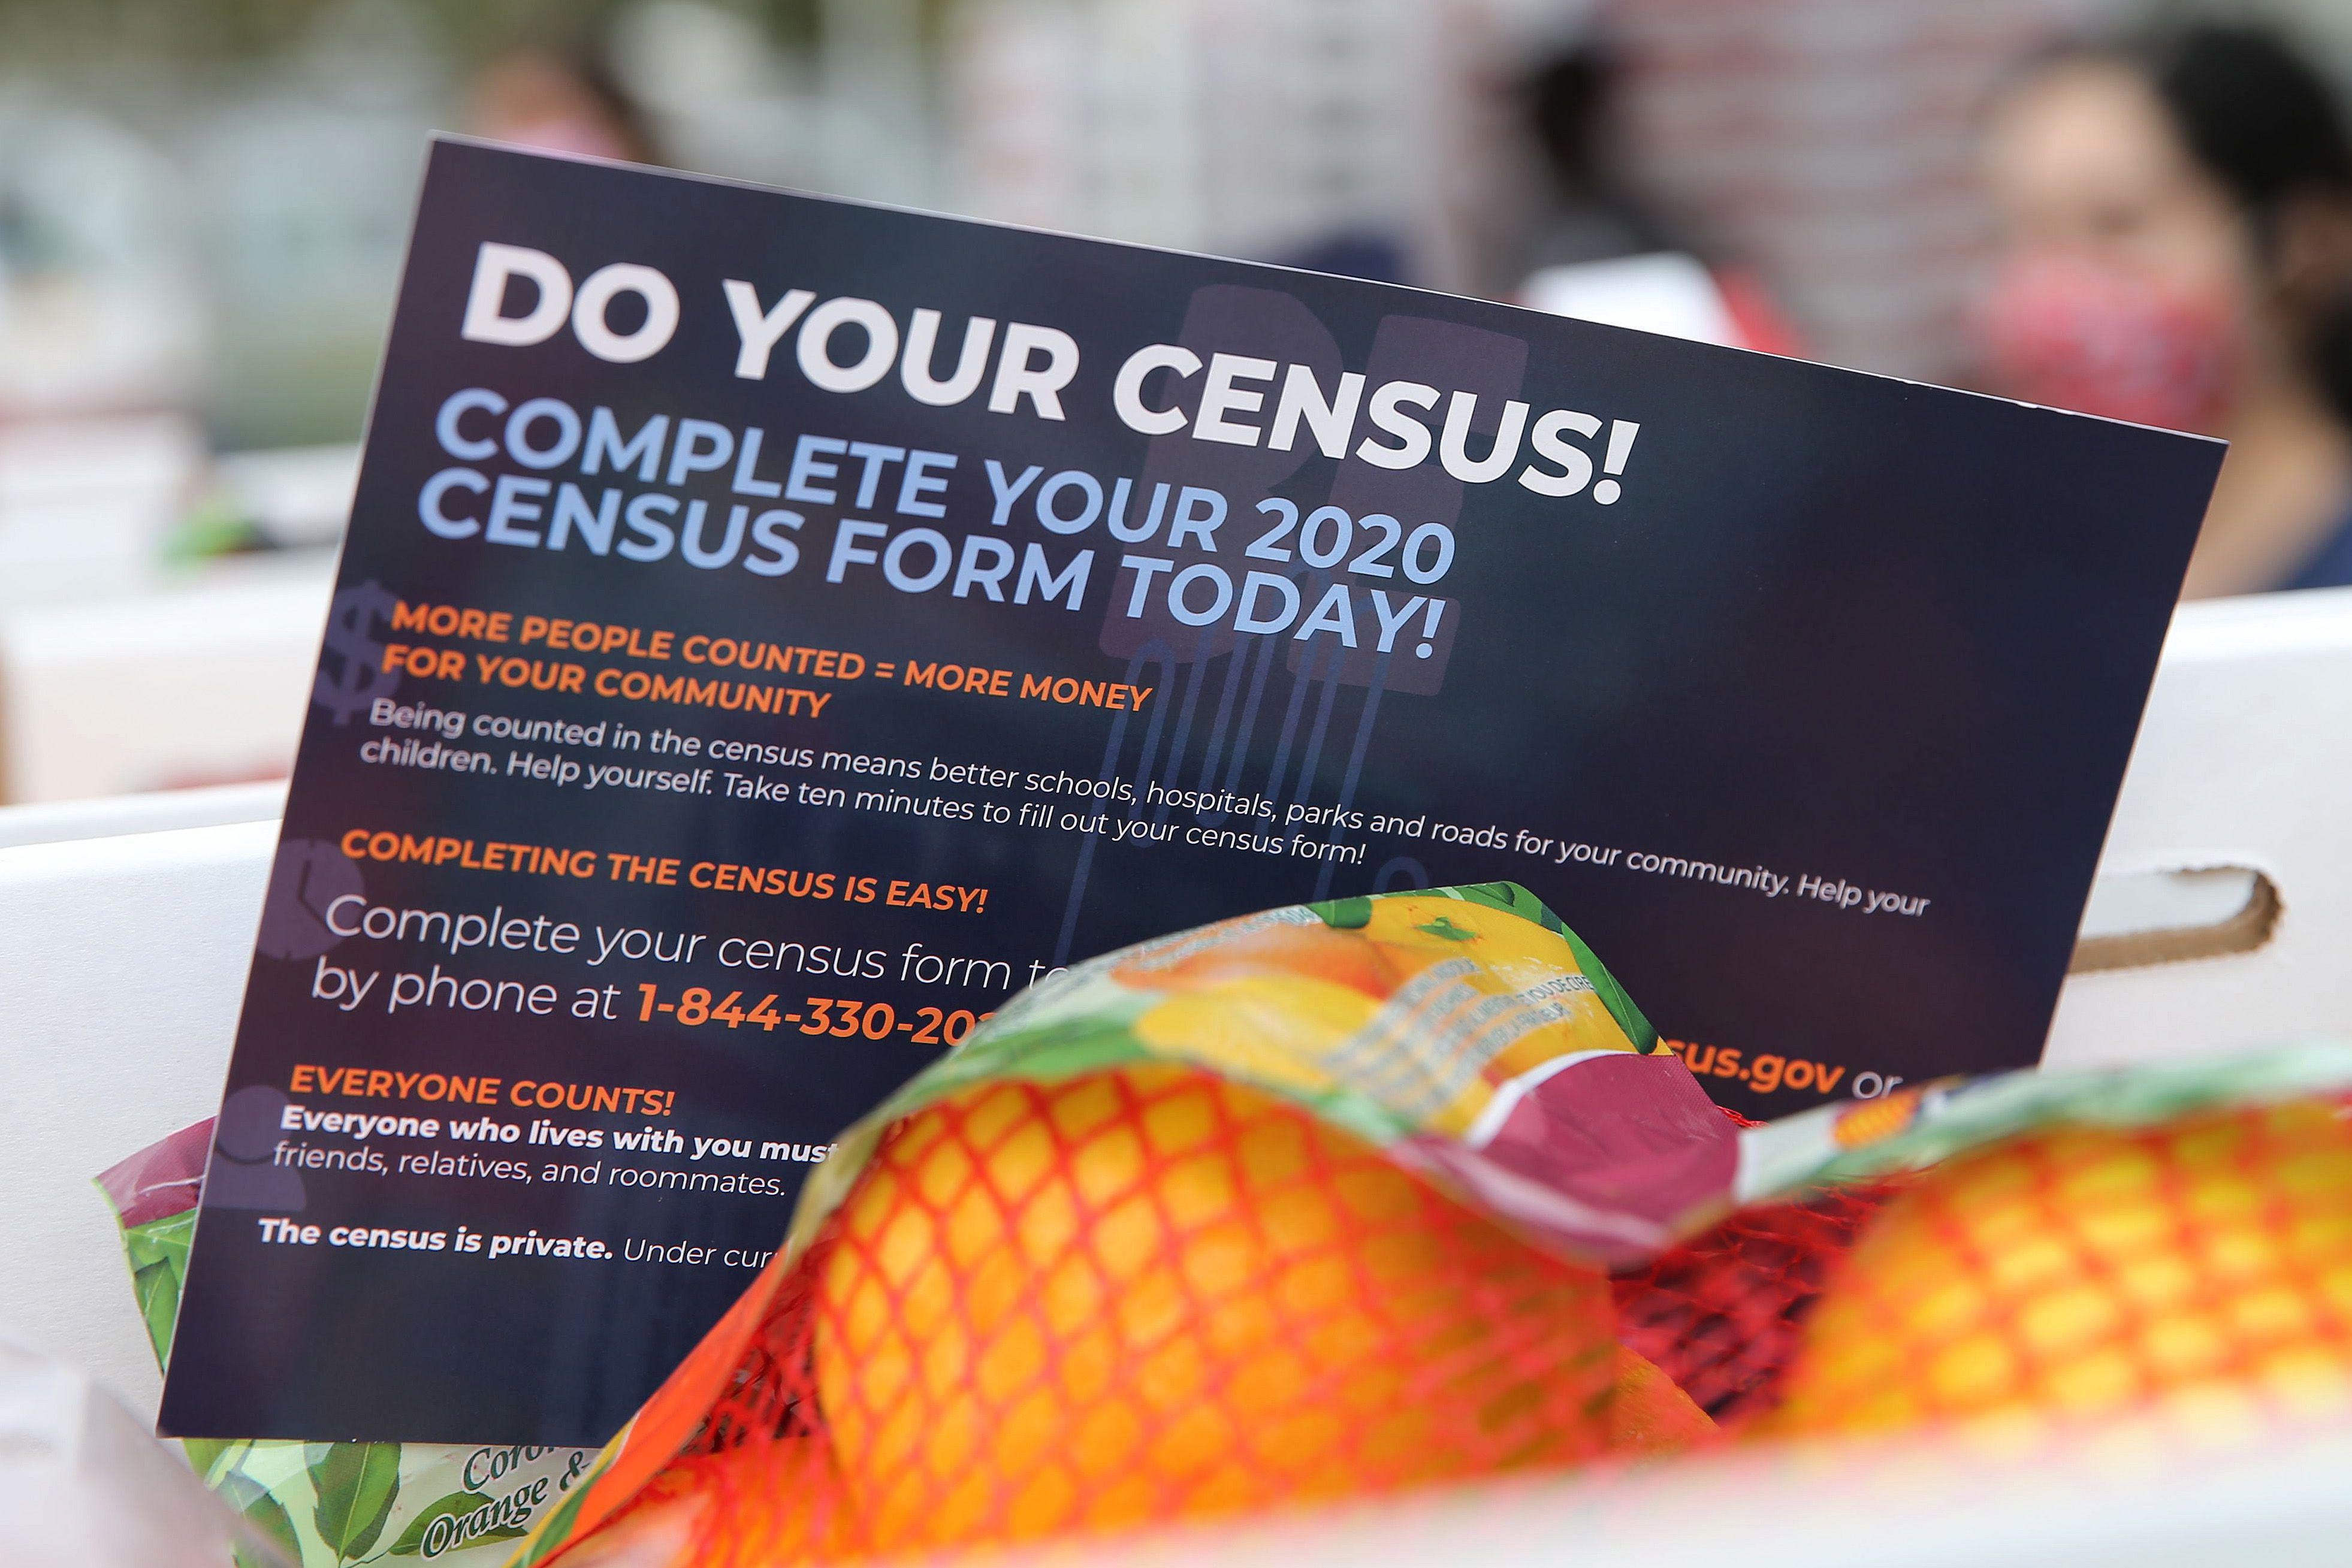 A pamphlet reading "Do Your Census!" is see in a box next to some oranges.